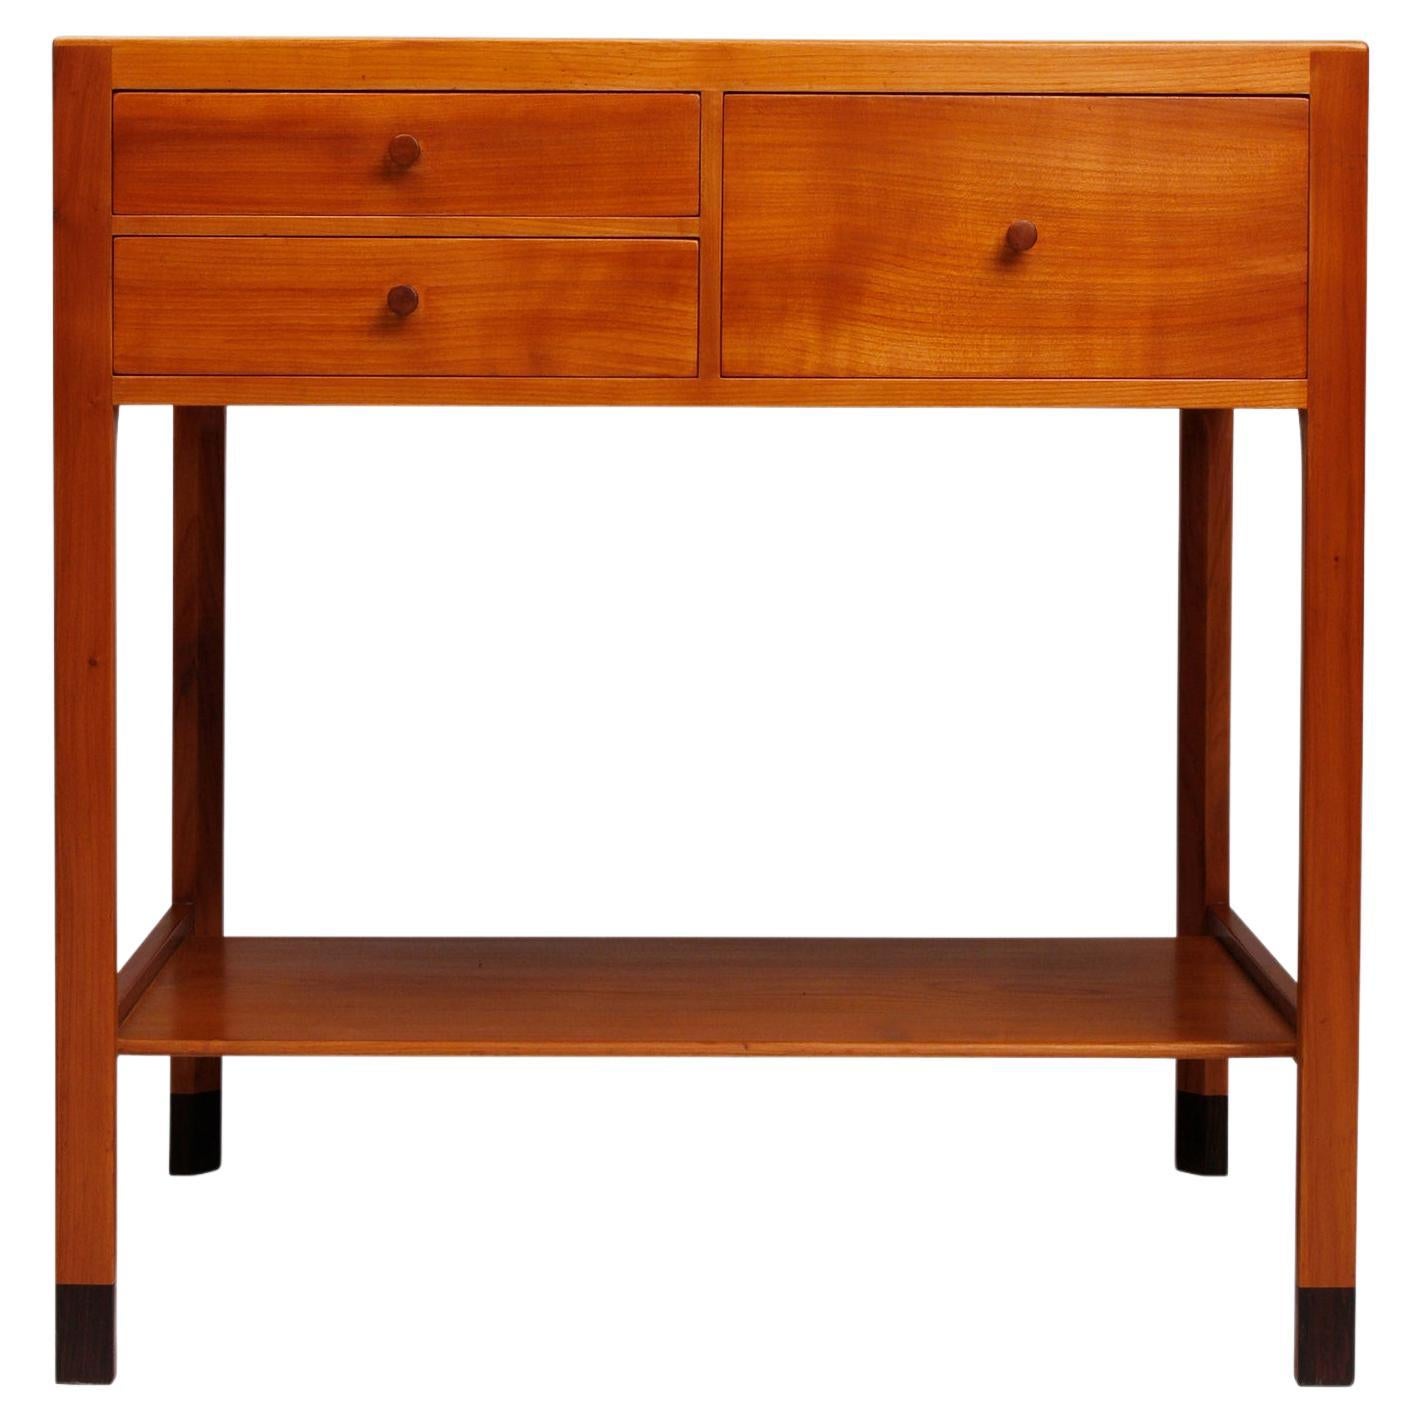 Danish modern cherry wood side table with drawers and shelf For Sale